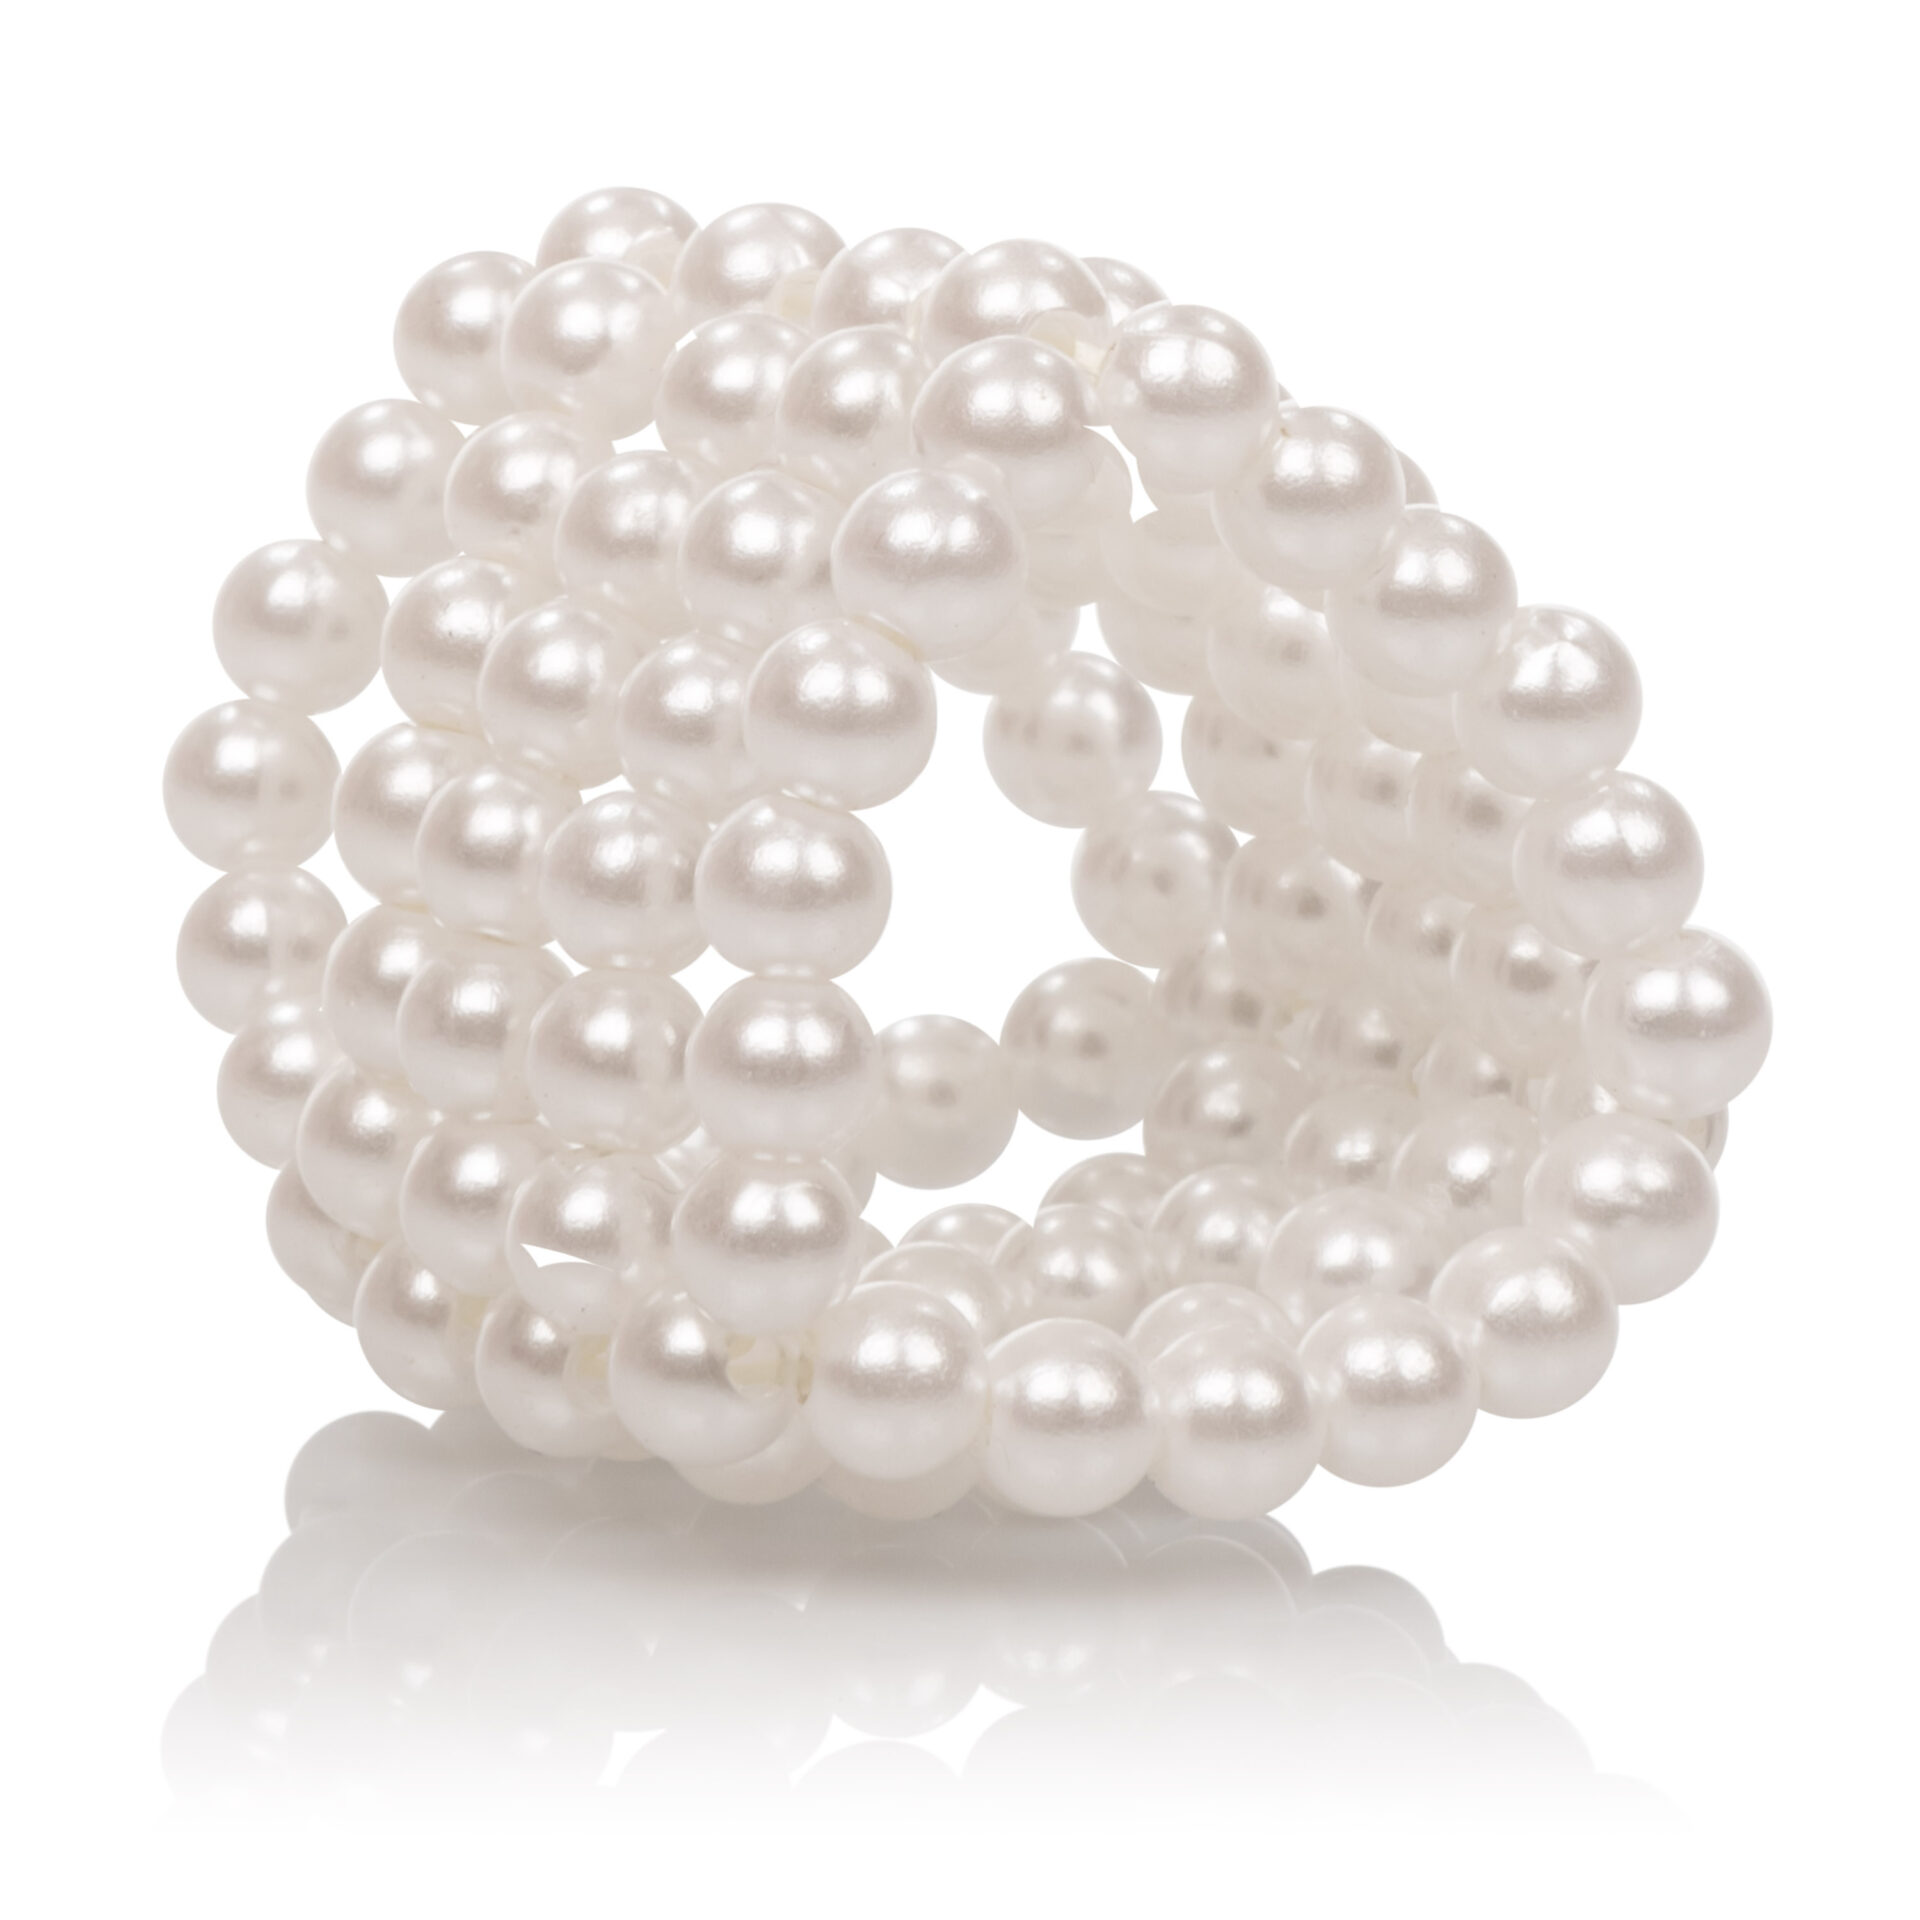 Basic Essentials Pearl Stroker Beads Small